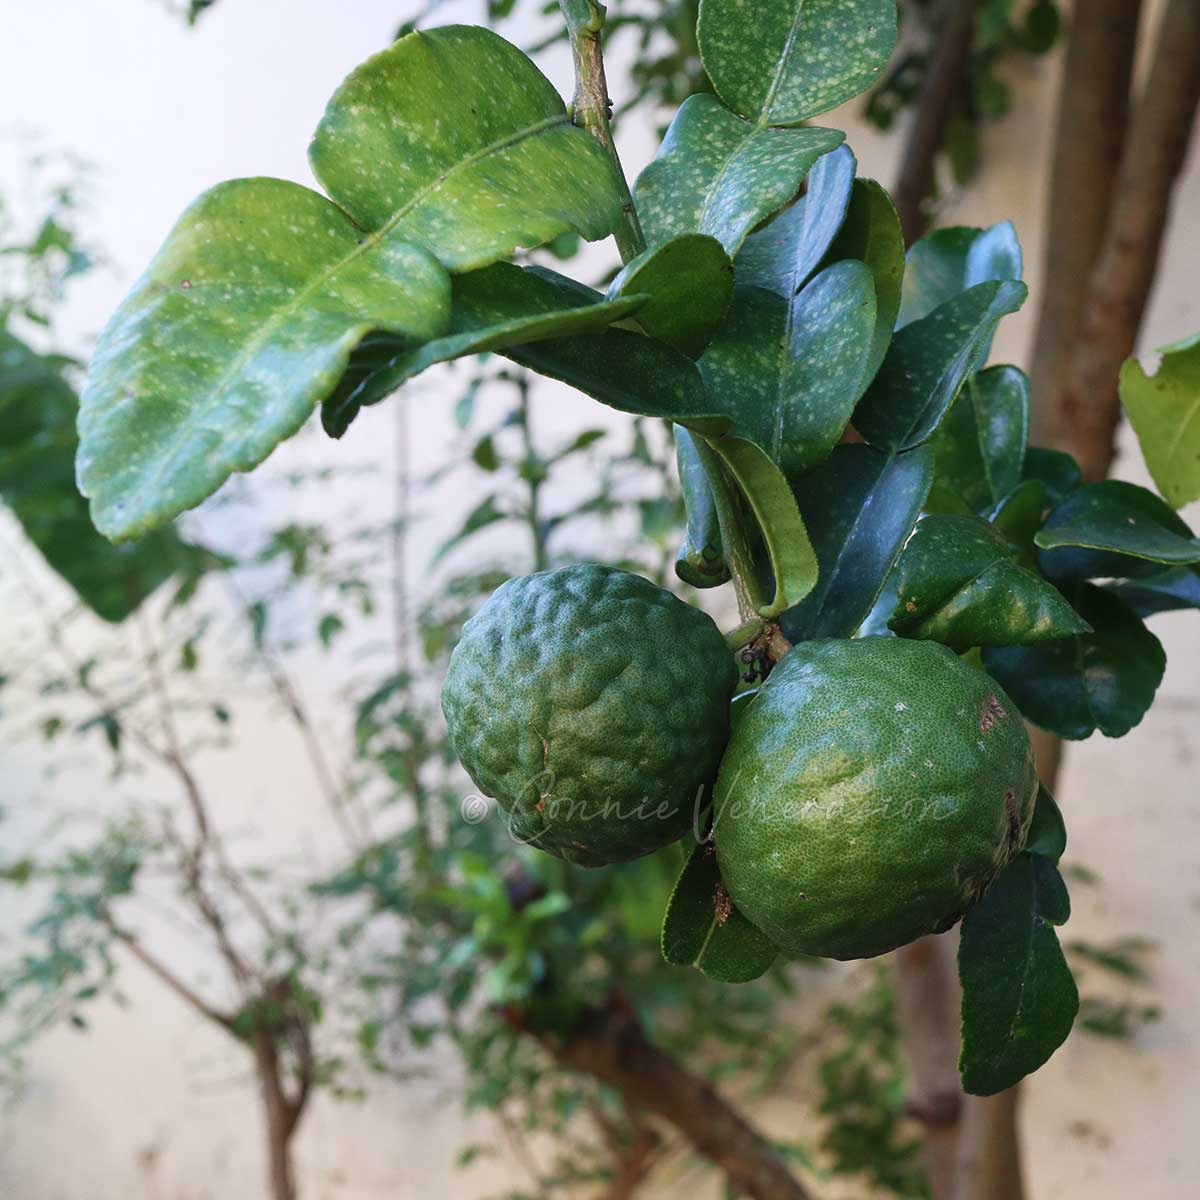 Kaffir time tree with fruits and leaves